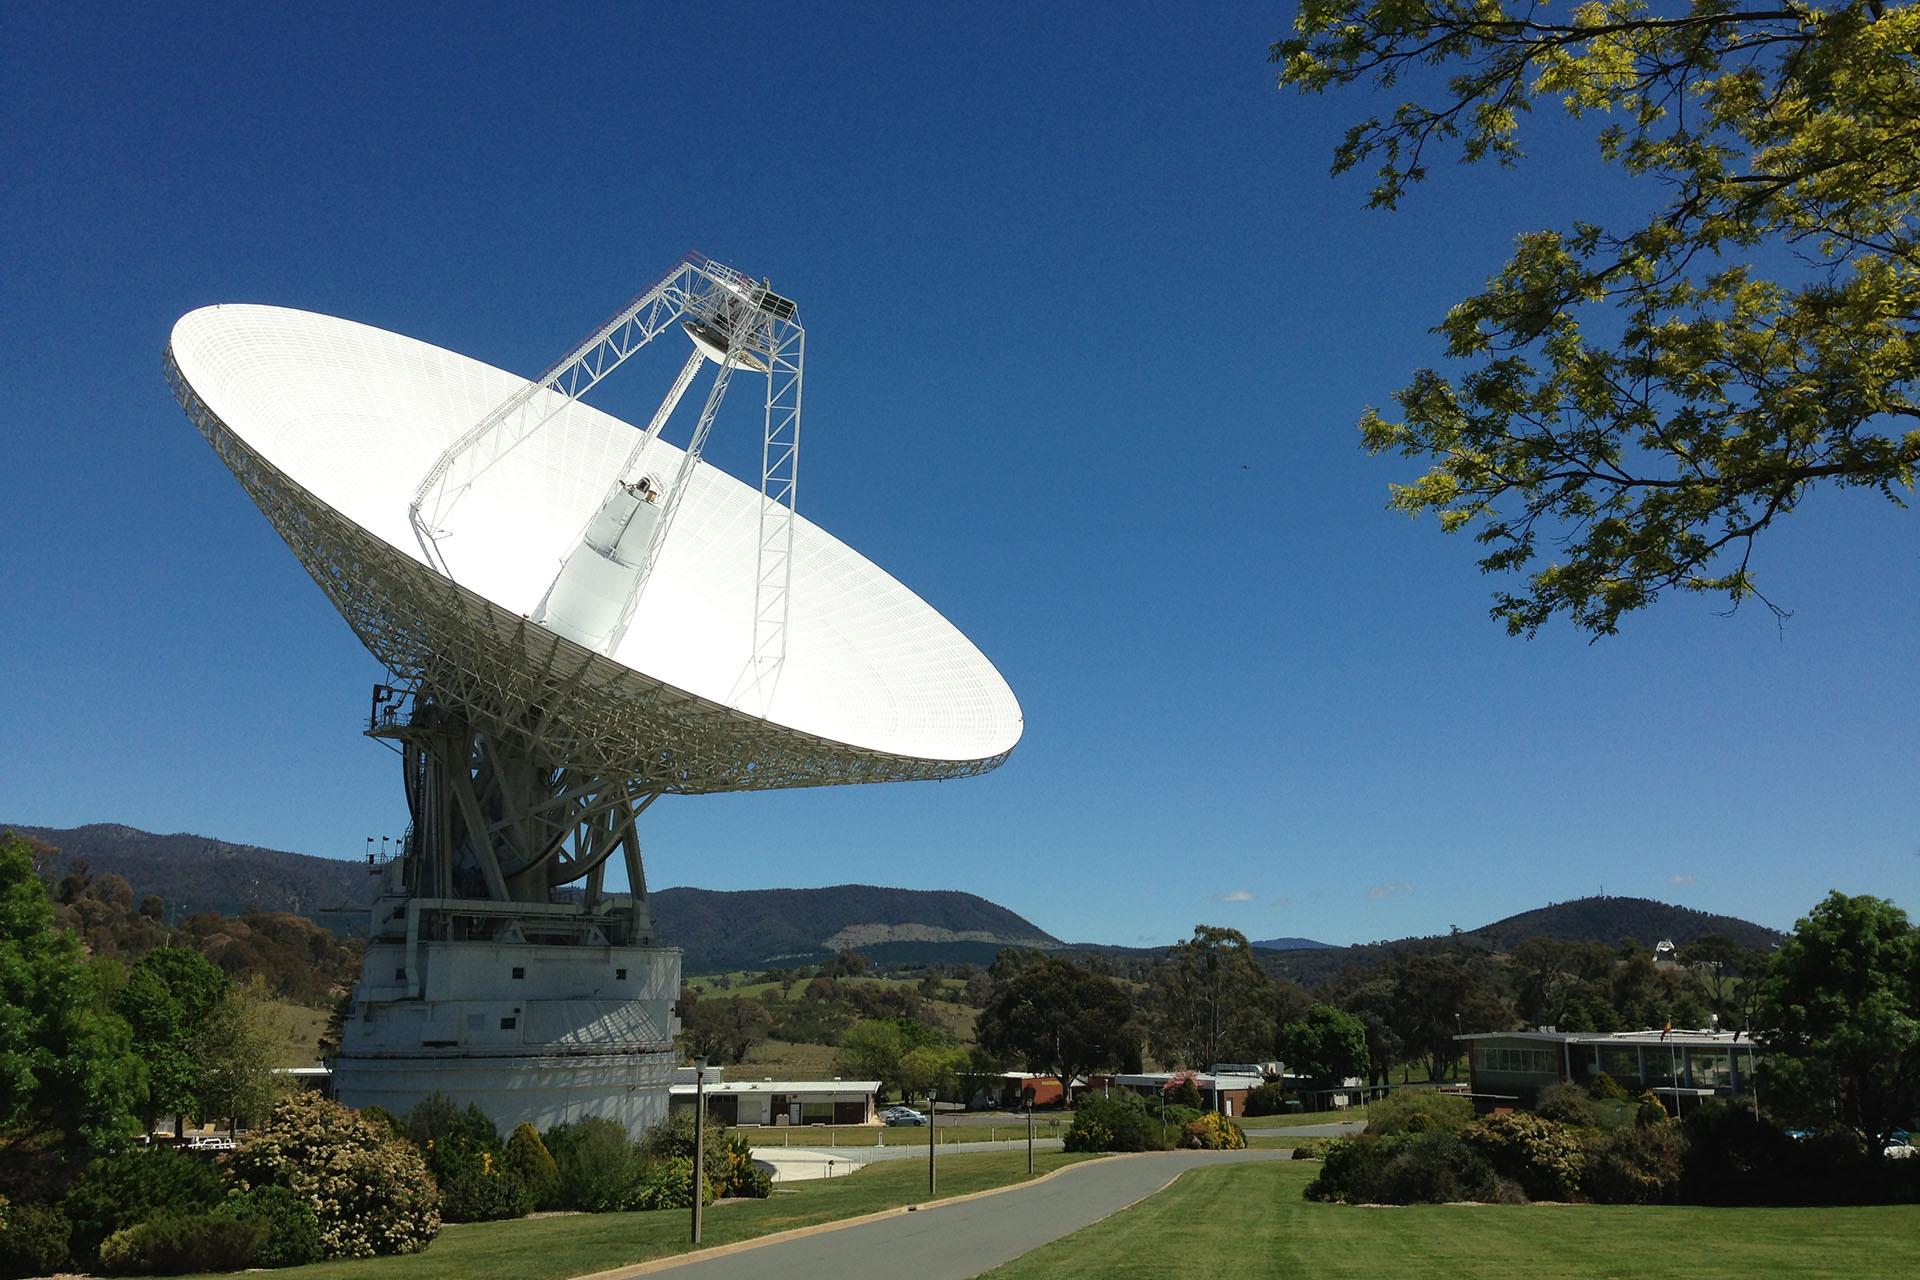 This photo shows a 70-meter radio antenna at the Deep Space Network’s Canberra facility in Australia.